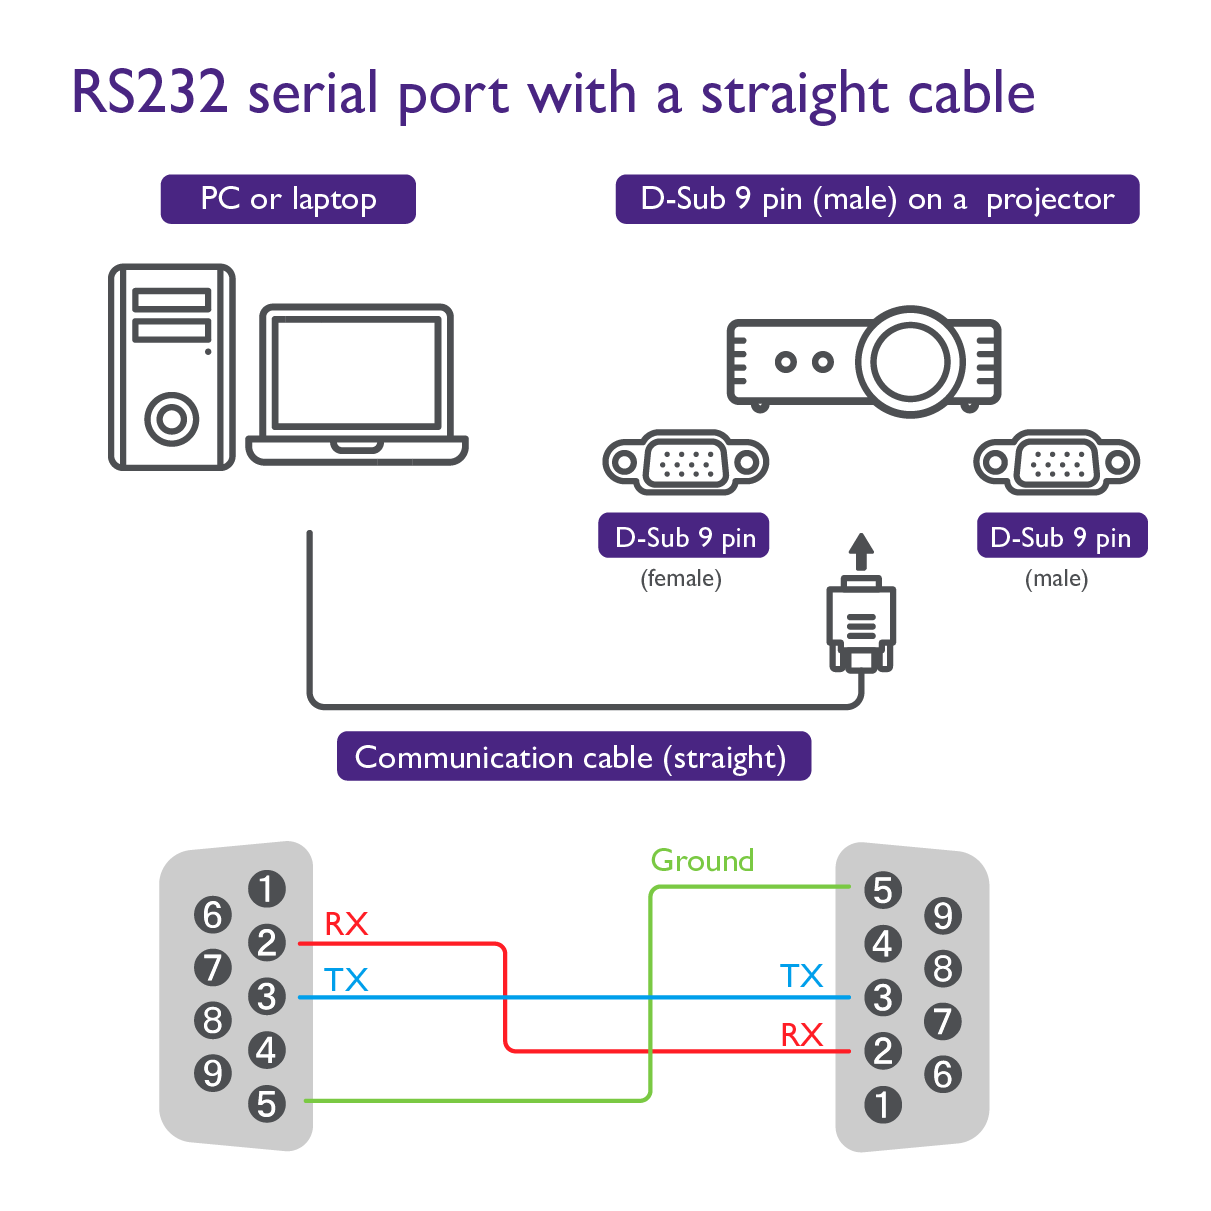 The picture shows a RS232 serial port with a straight cable.